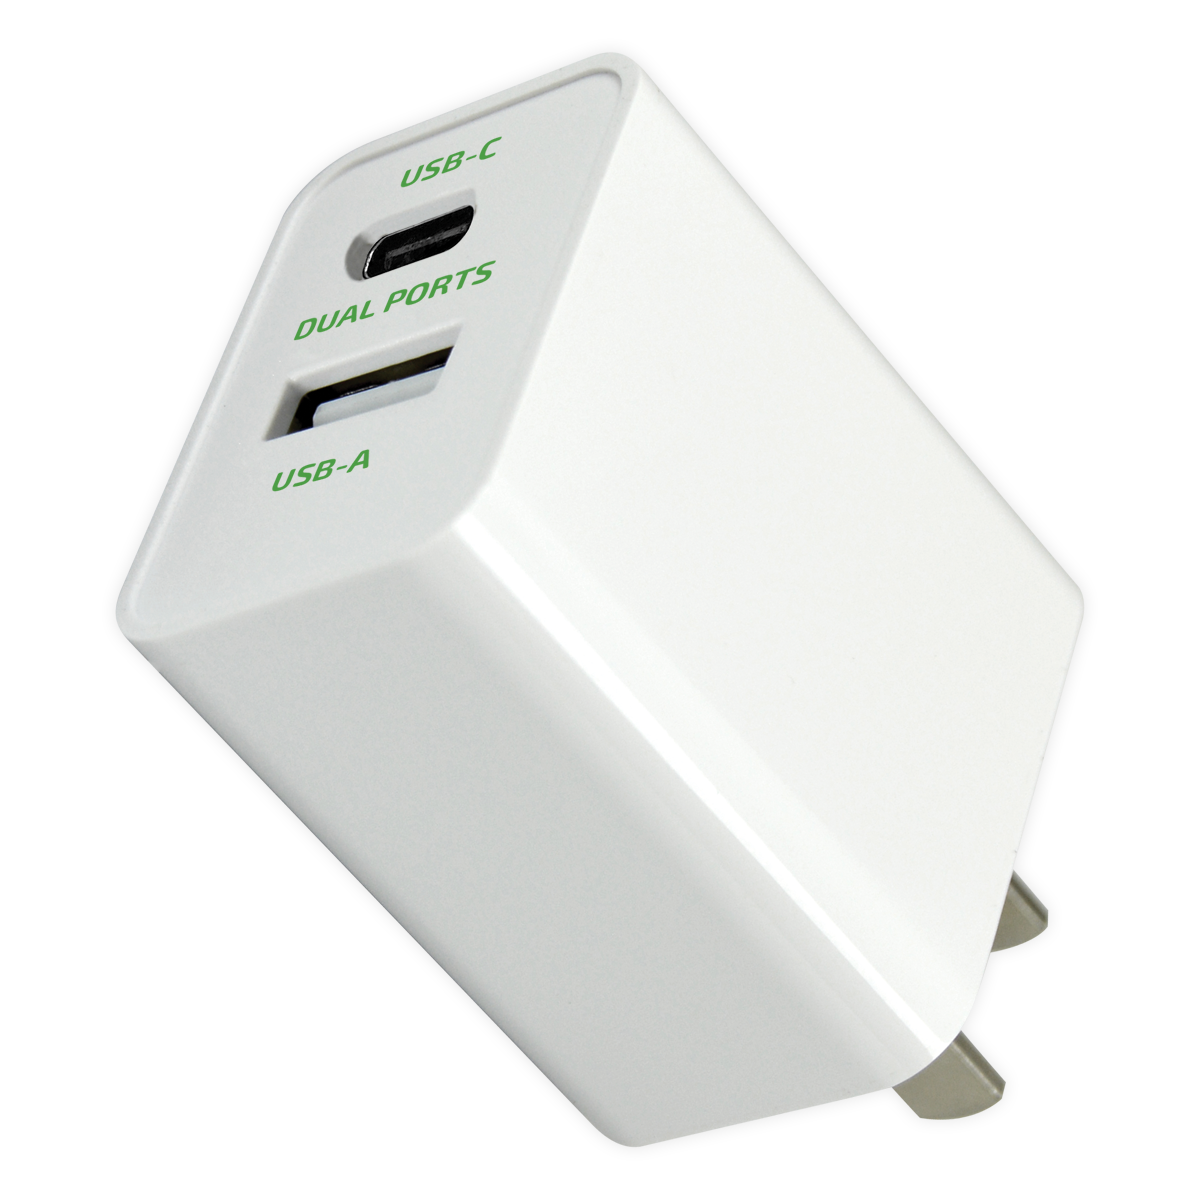 WHOLESALE 20W USB-A AND USB-C DUAL PORT USB-C-TO-LIGHTNING WALL CHARGER SET 3 PIECES PER PACK 24612